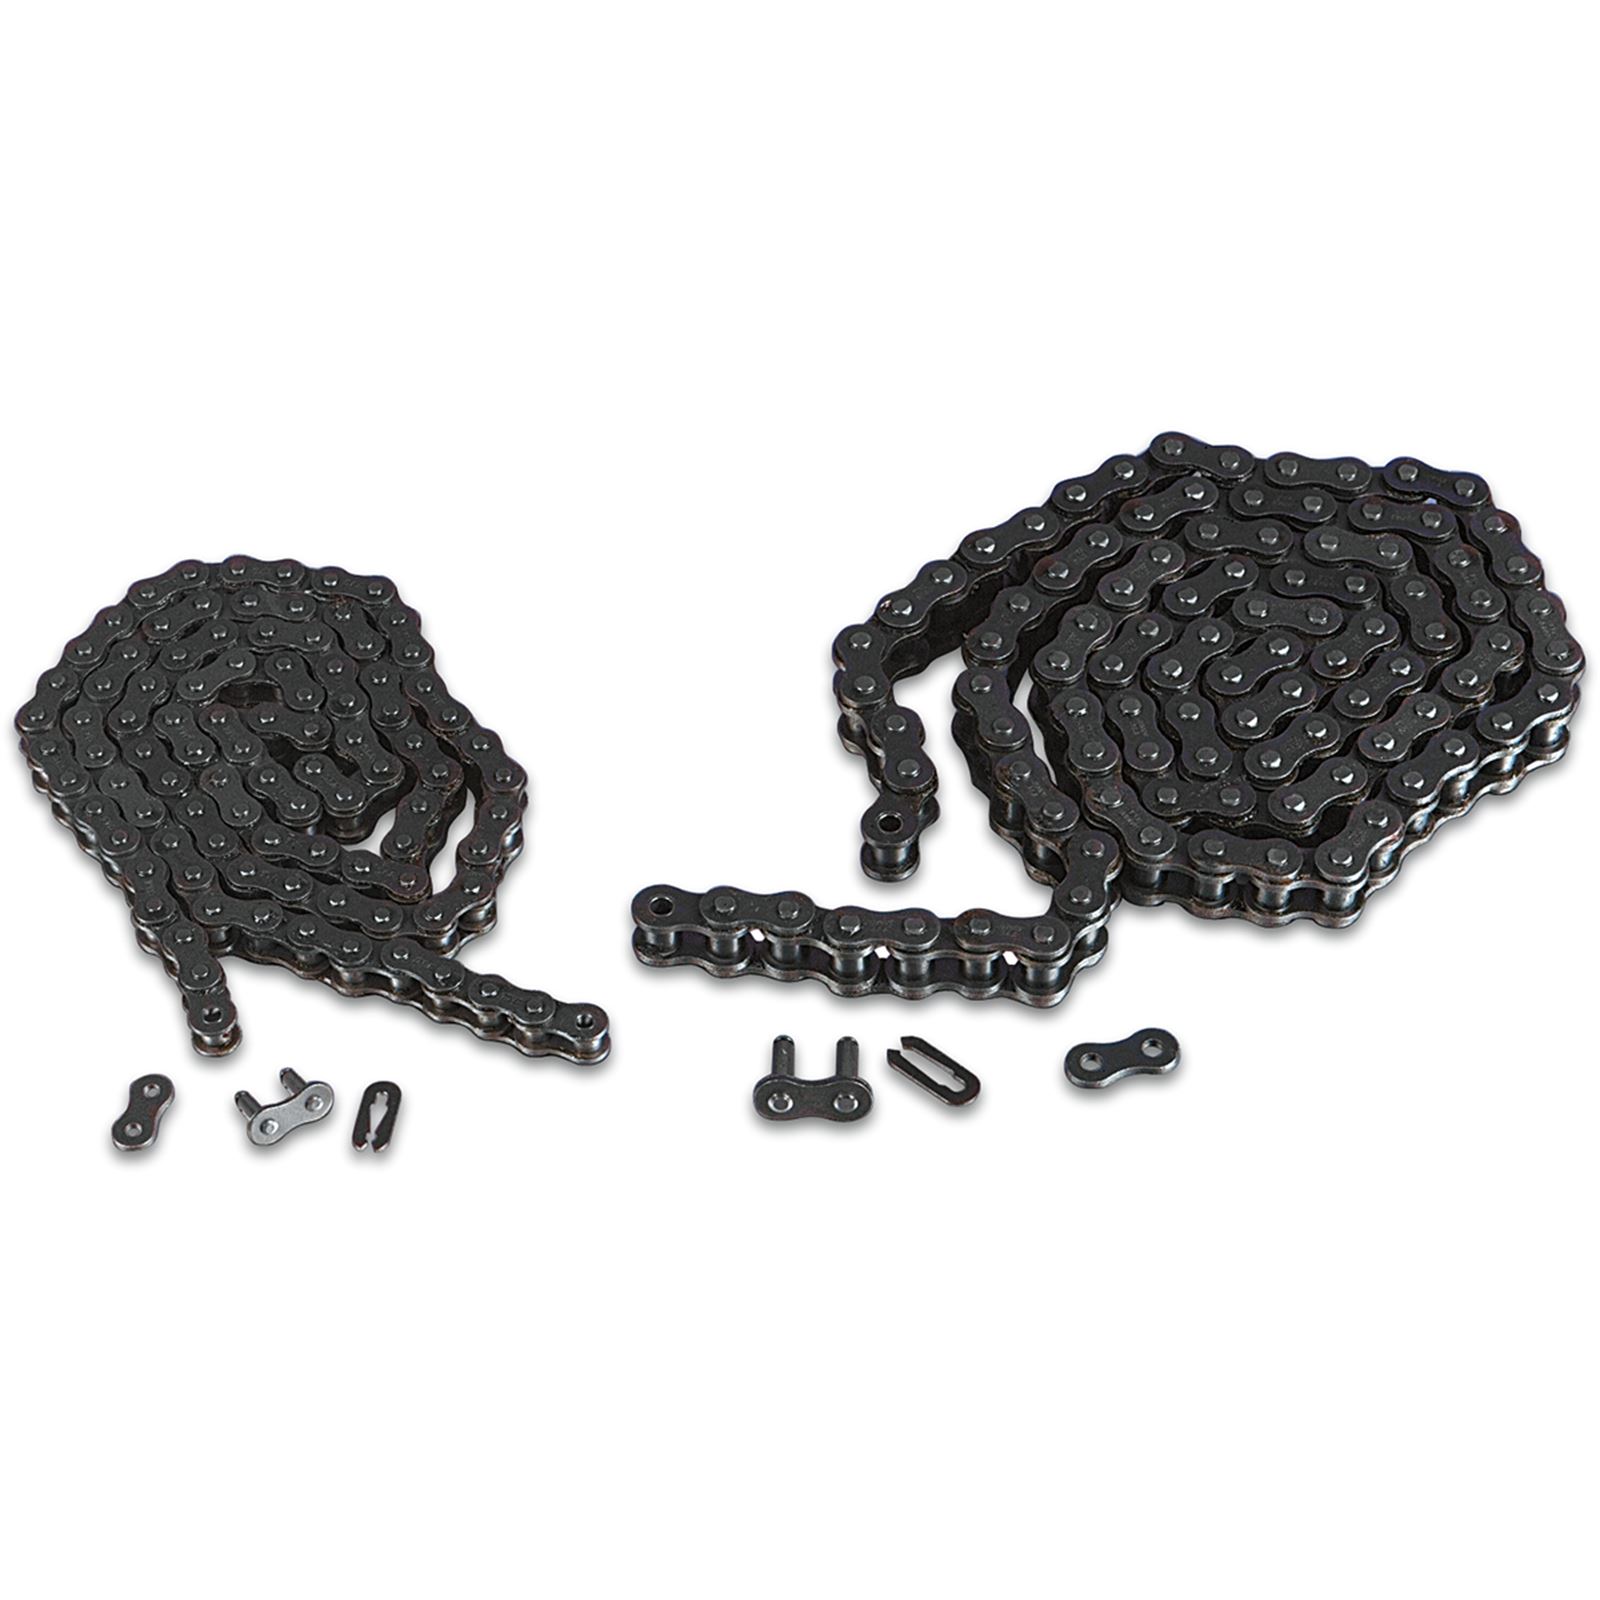 Parts Unlimited 420 - Drive Chain - 102 Links